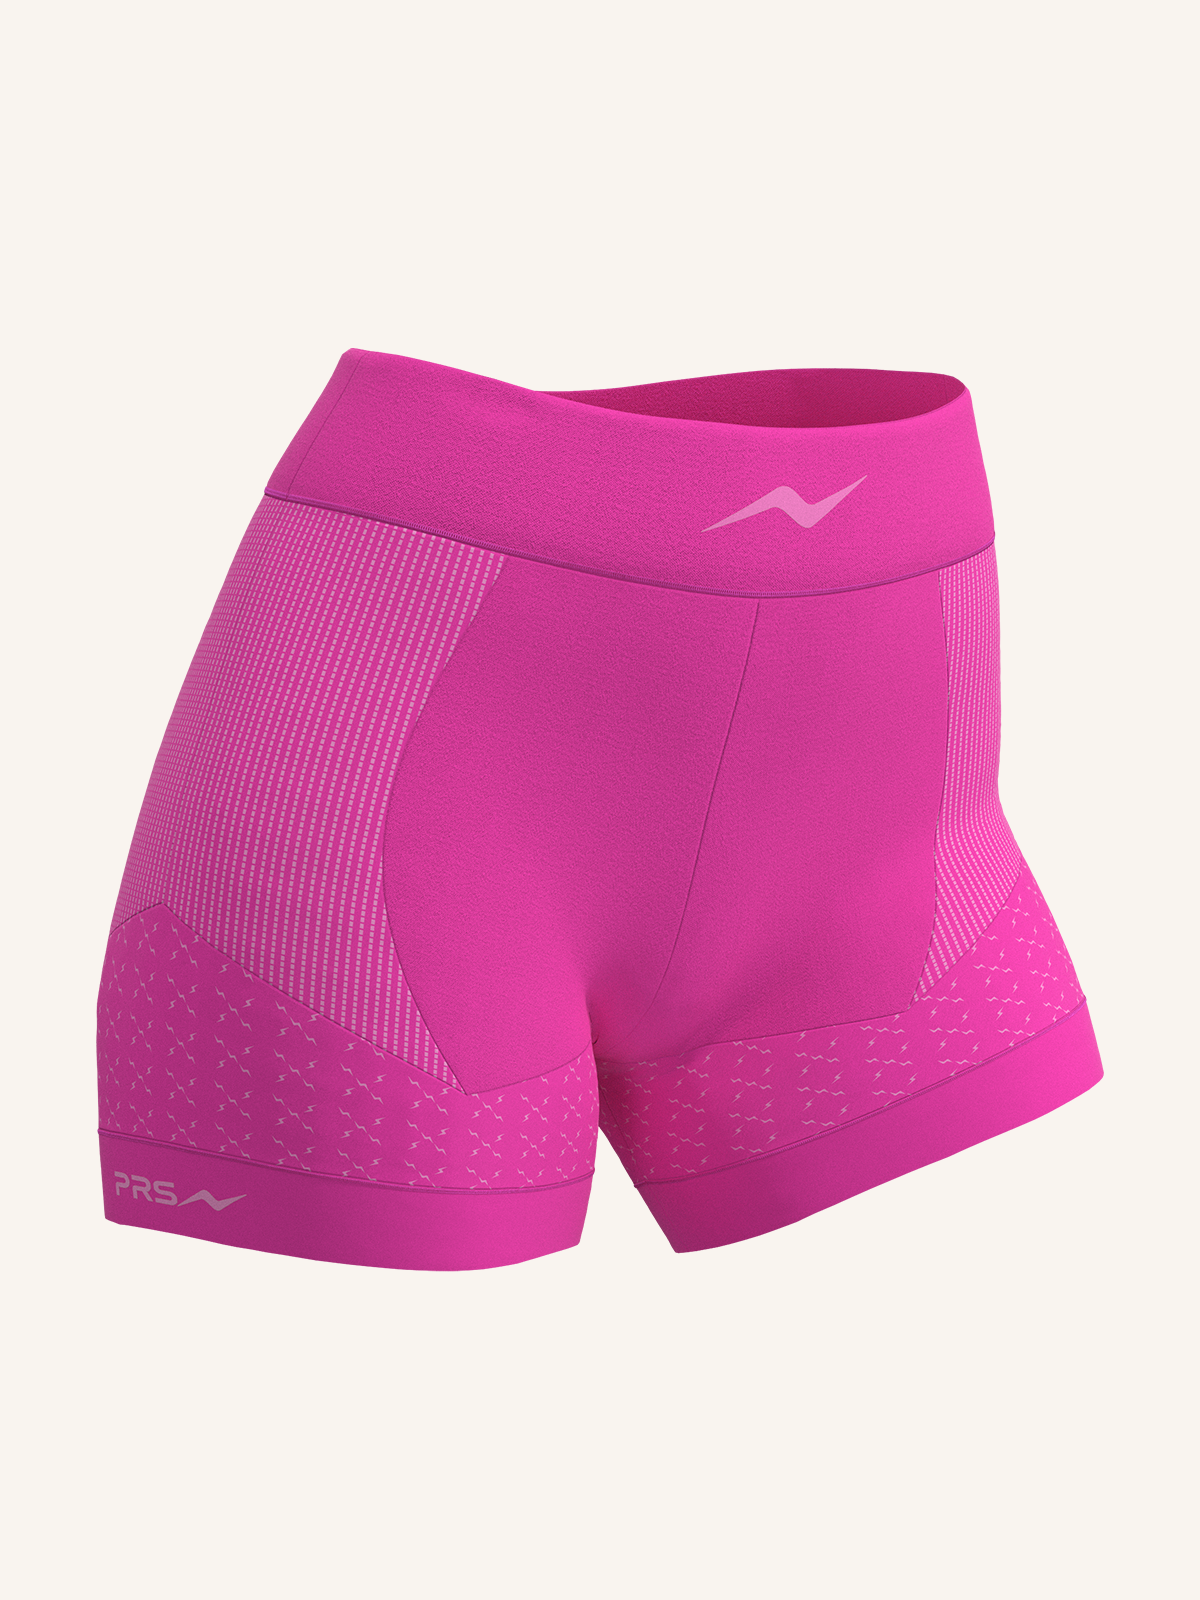 Running Shorts for Women | Single Pack | PRS PRO 600